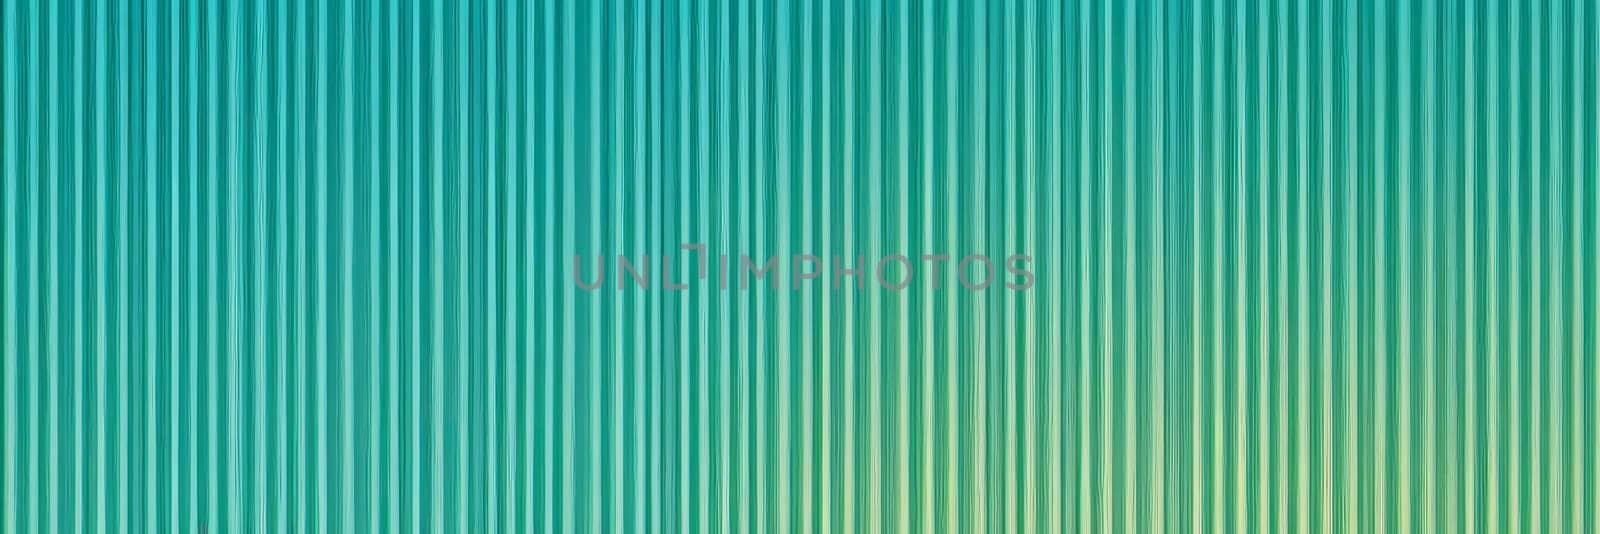 Corrugated Shapes in Aqua and Linen by nkotlyar